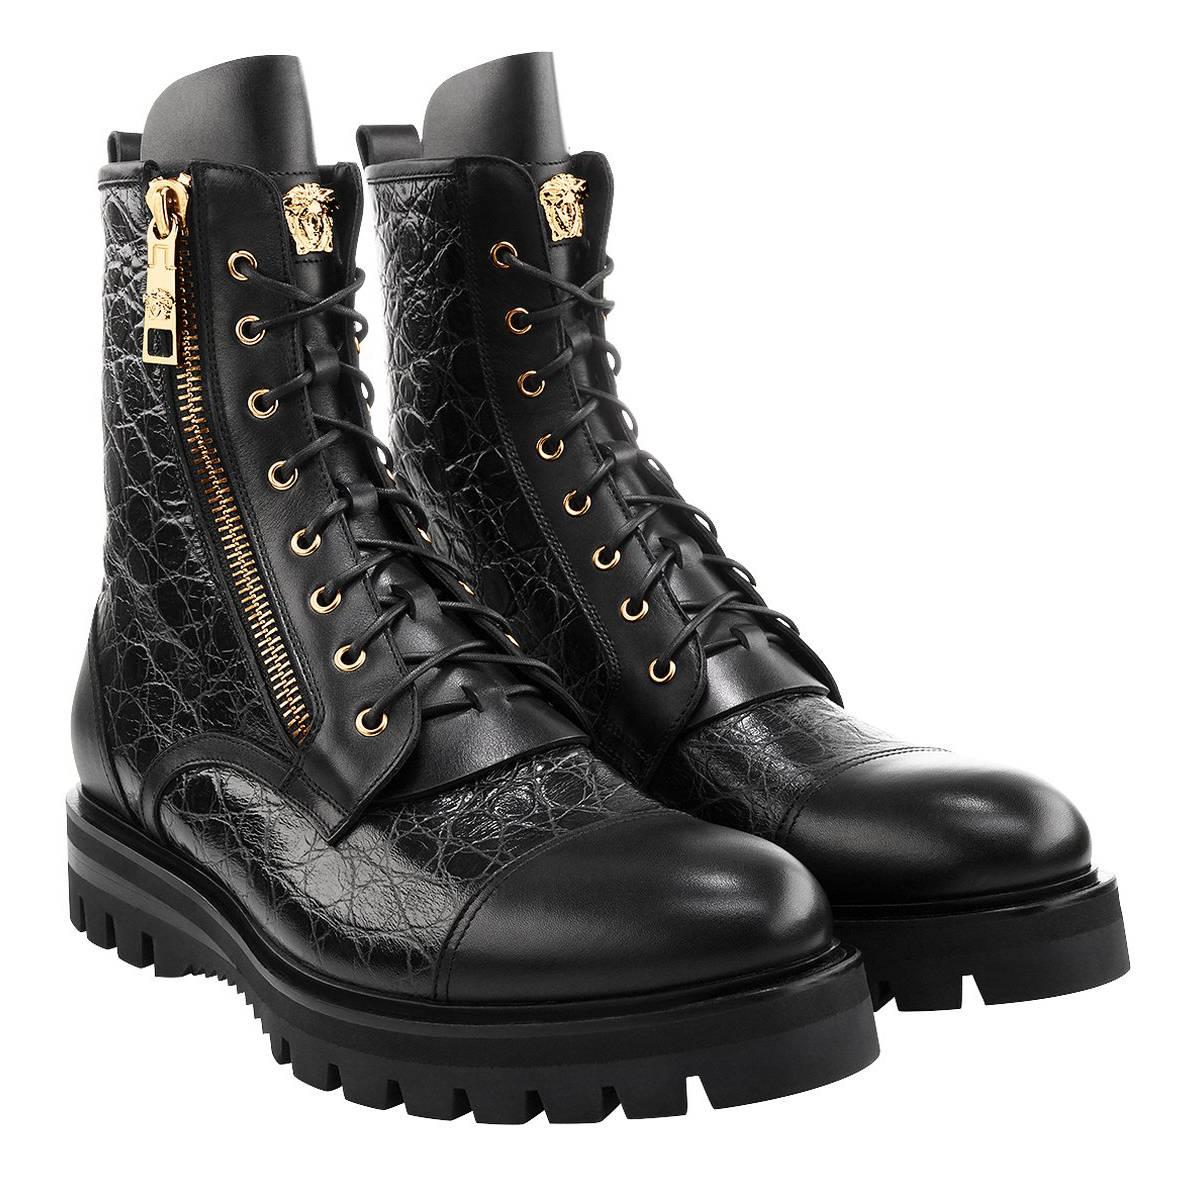 Versace Men's Stamped Croc Army Boots 